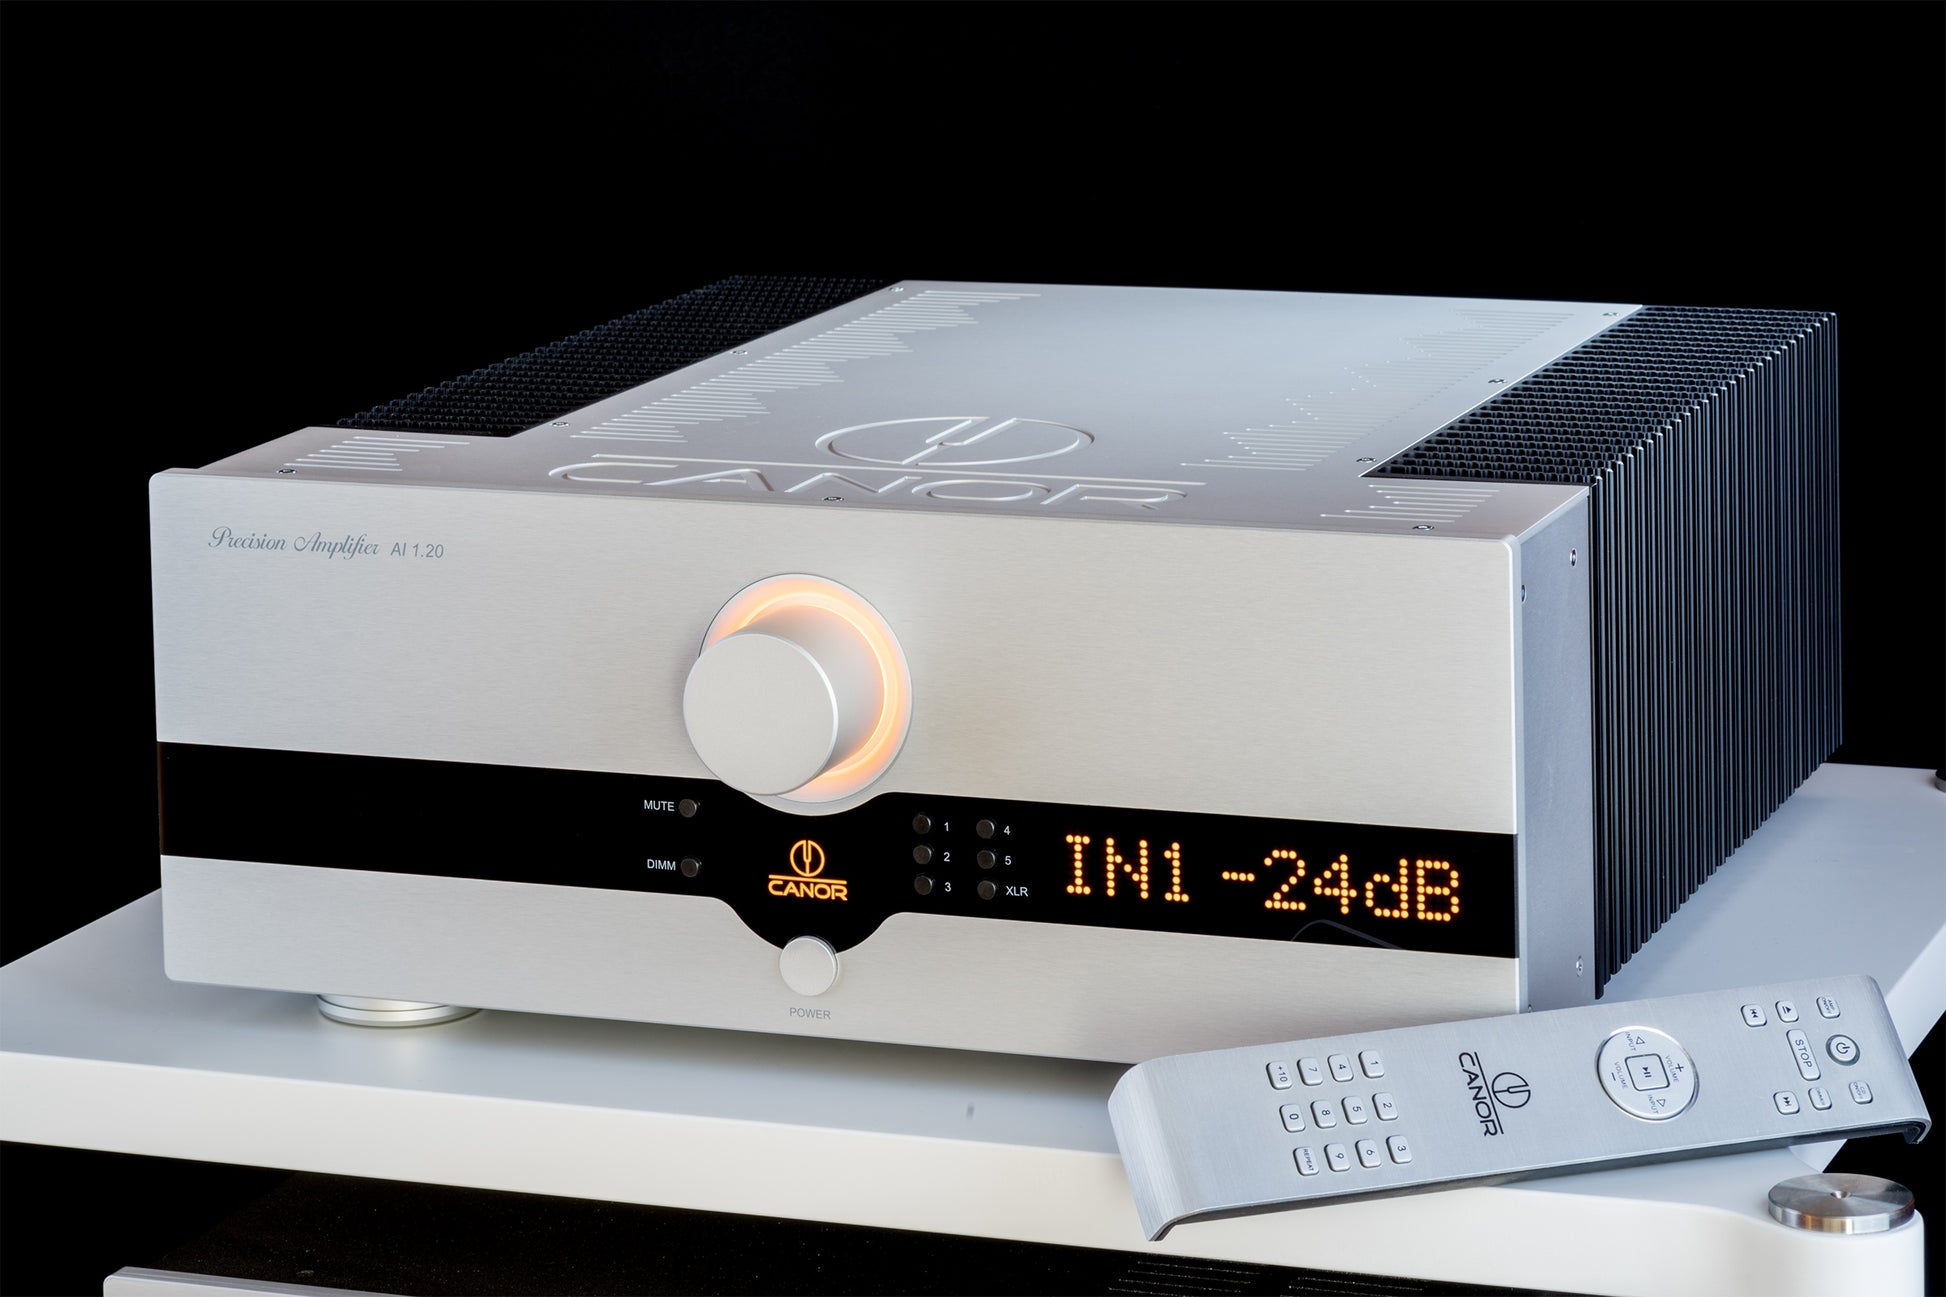 Canor Audio AI 1.20 SS Class A Integrated Amplifier